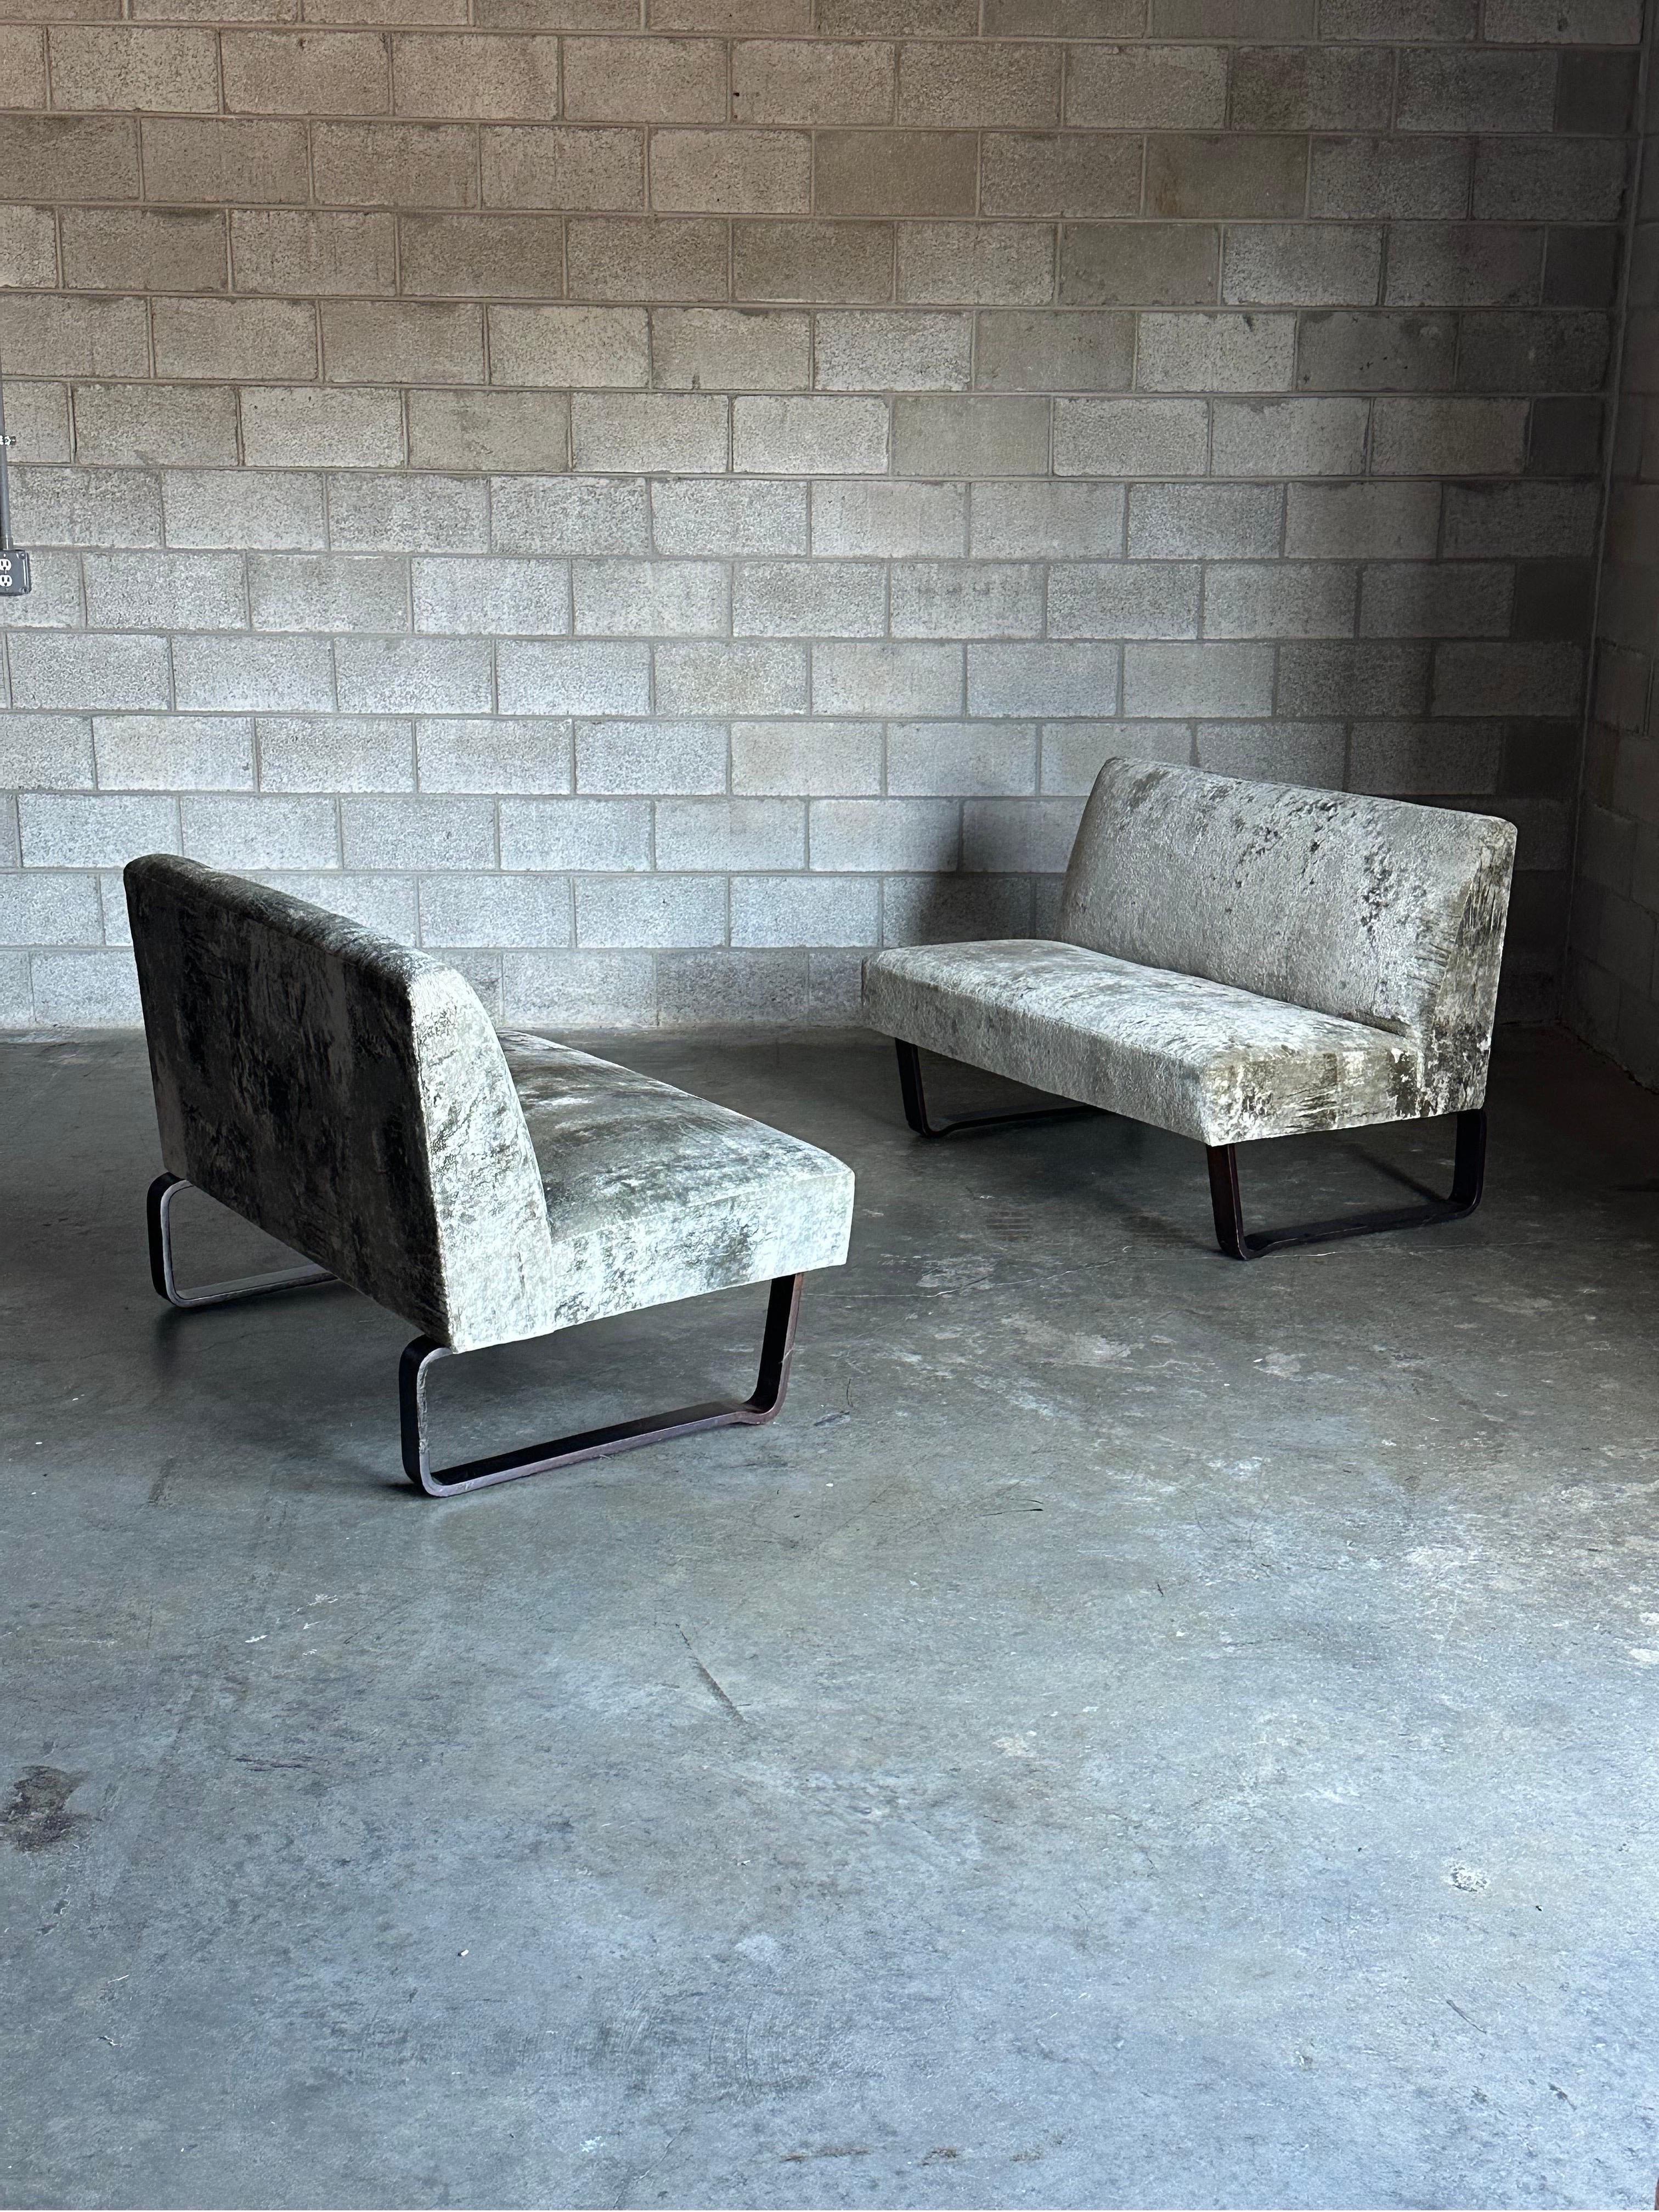 Rare pair of settees designed by Edward Wormley for Dunbar Furniture. Settees feature an armless profile complete with two mahogany 